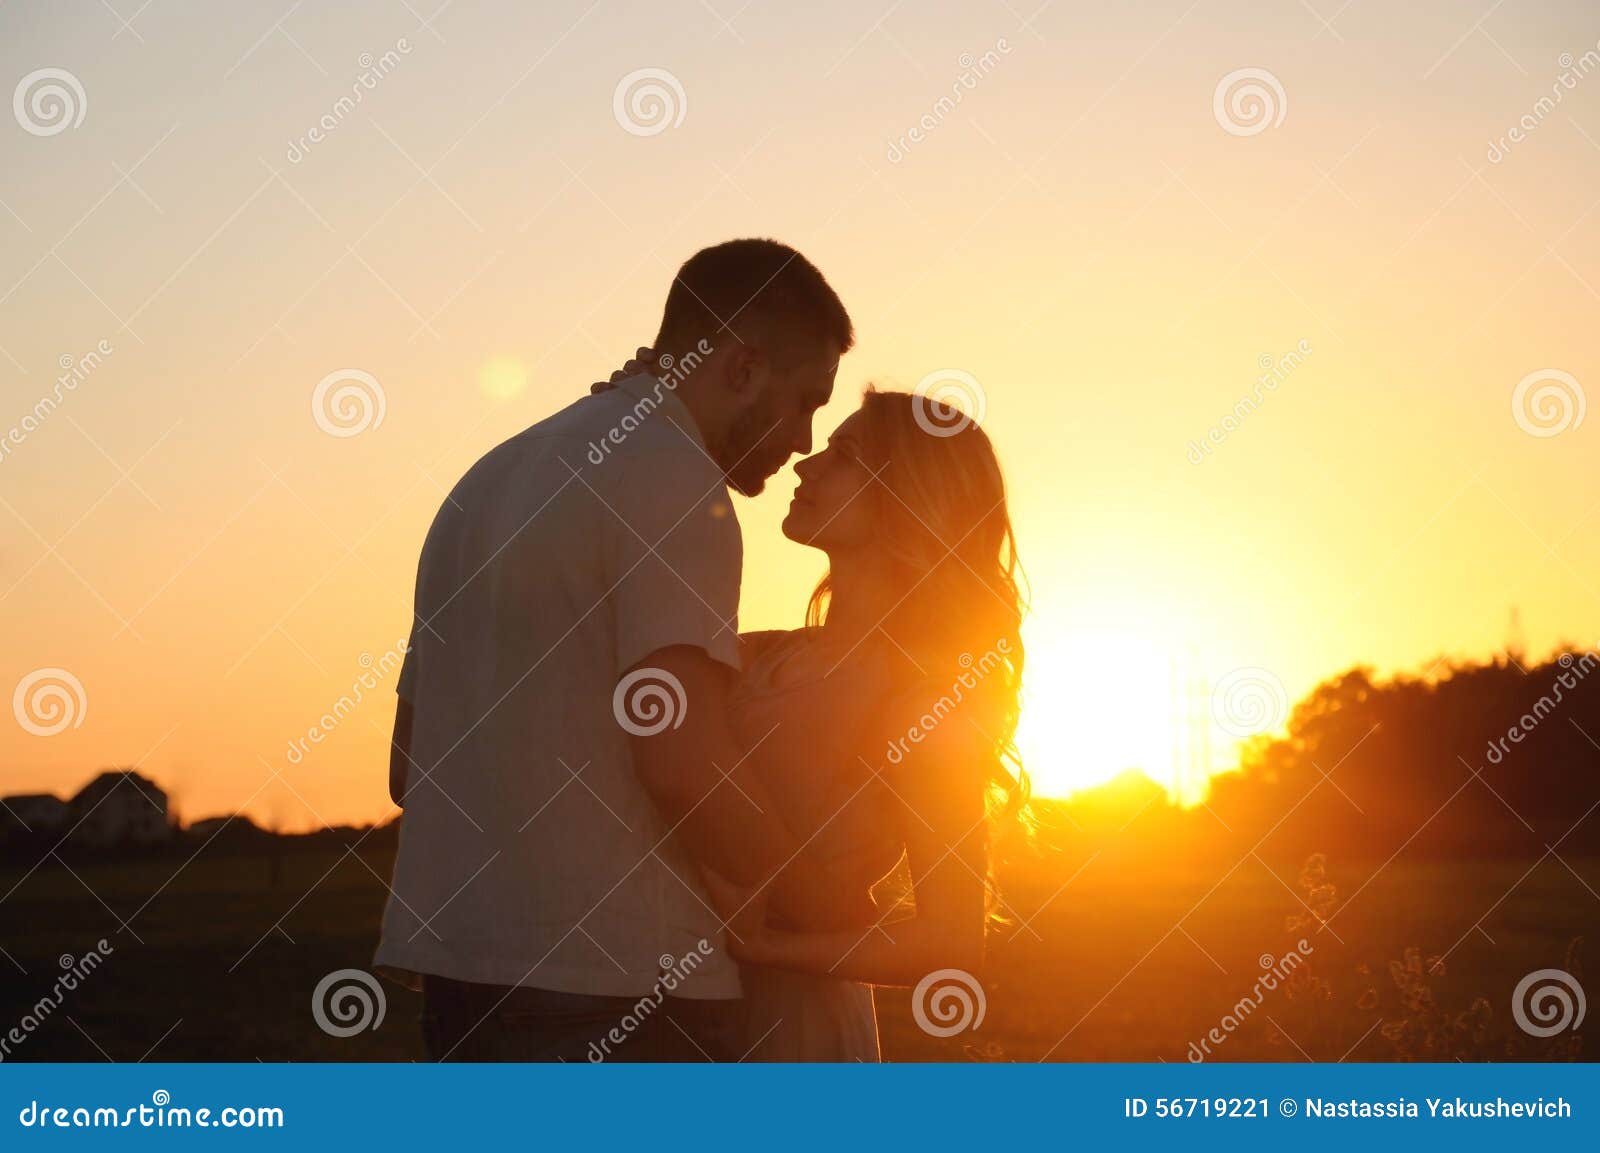 romantic sensual young couple in love posing in field at the sun